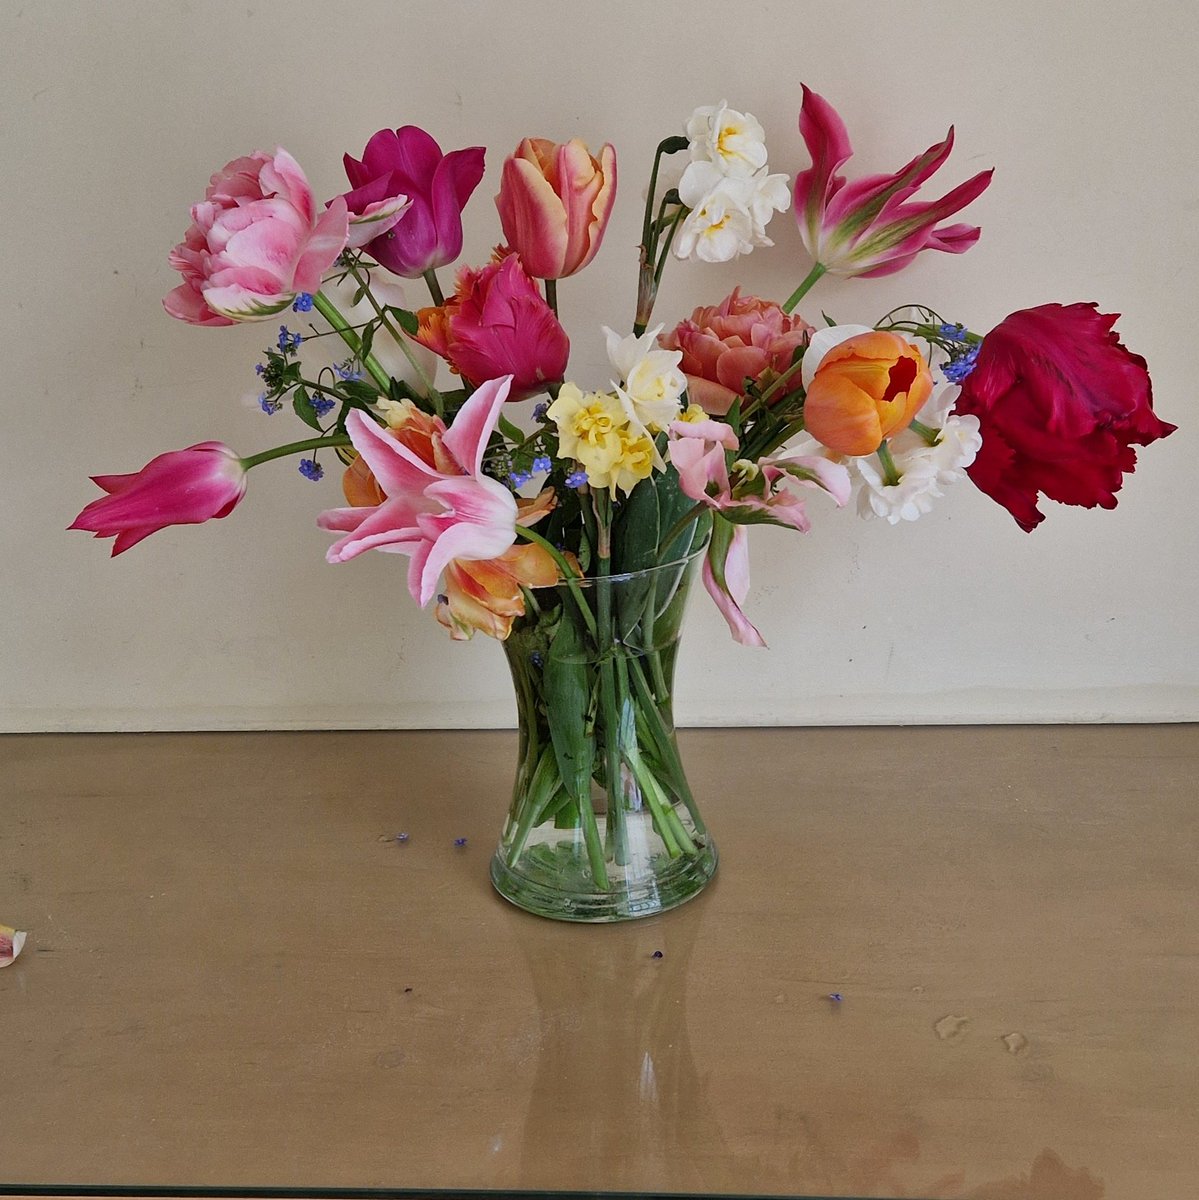 All the tulips and daffodils picked from my gardentoday #posy #bouquet #spring #tulip #daffodil #flowers